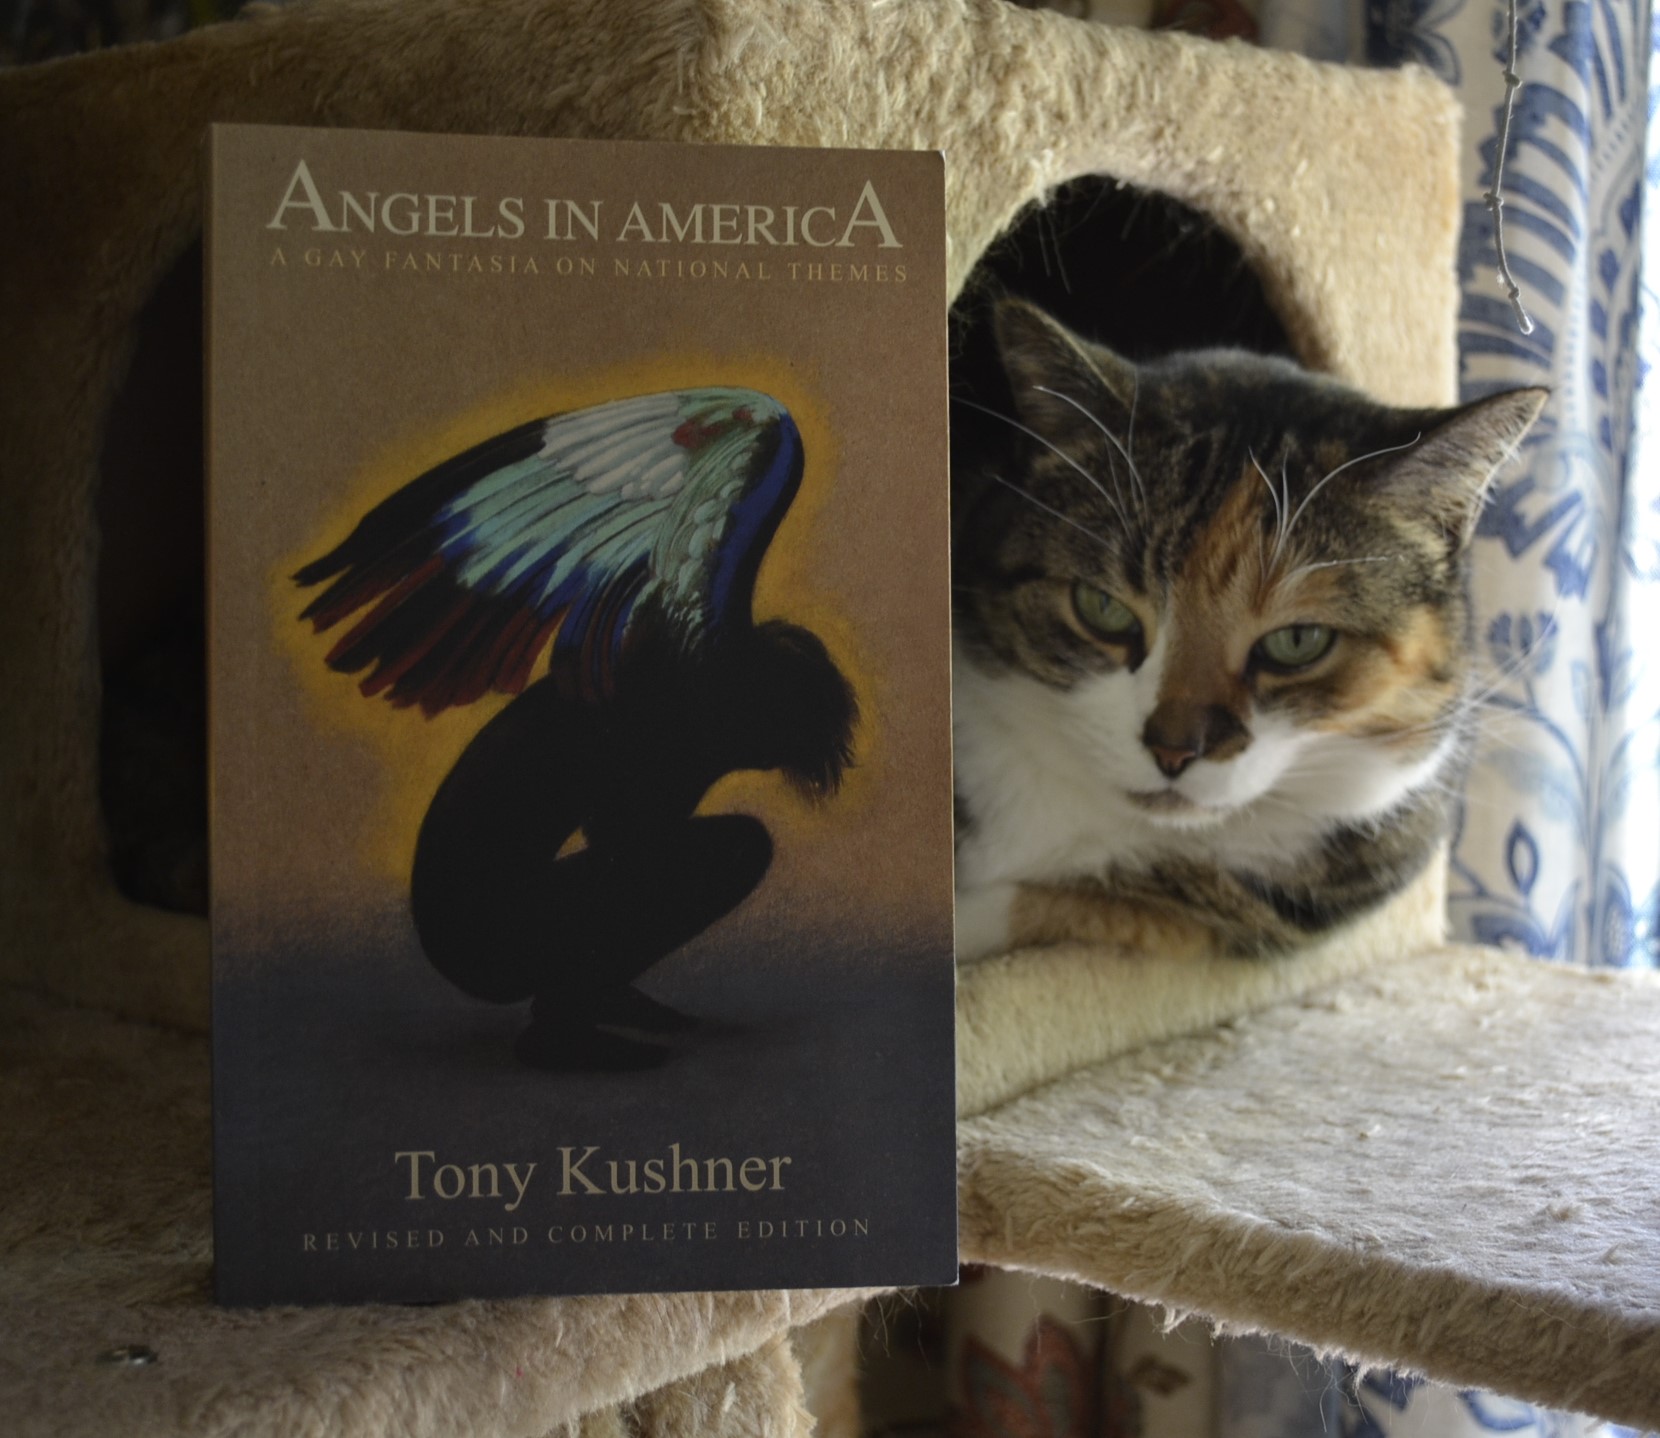 A calico tabby lounges beside a copy of Angels in America: A Gay Fantasia on National Themes.